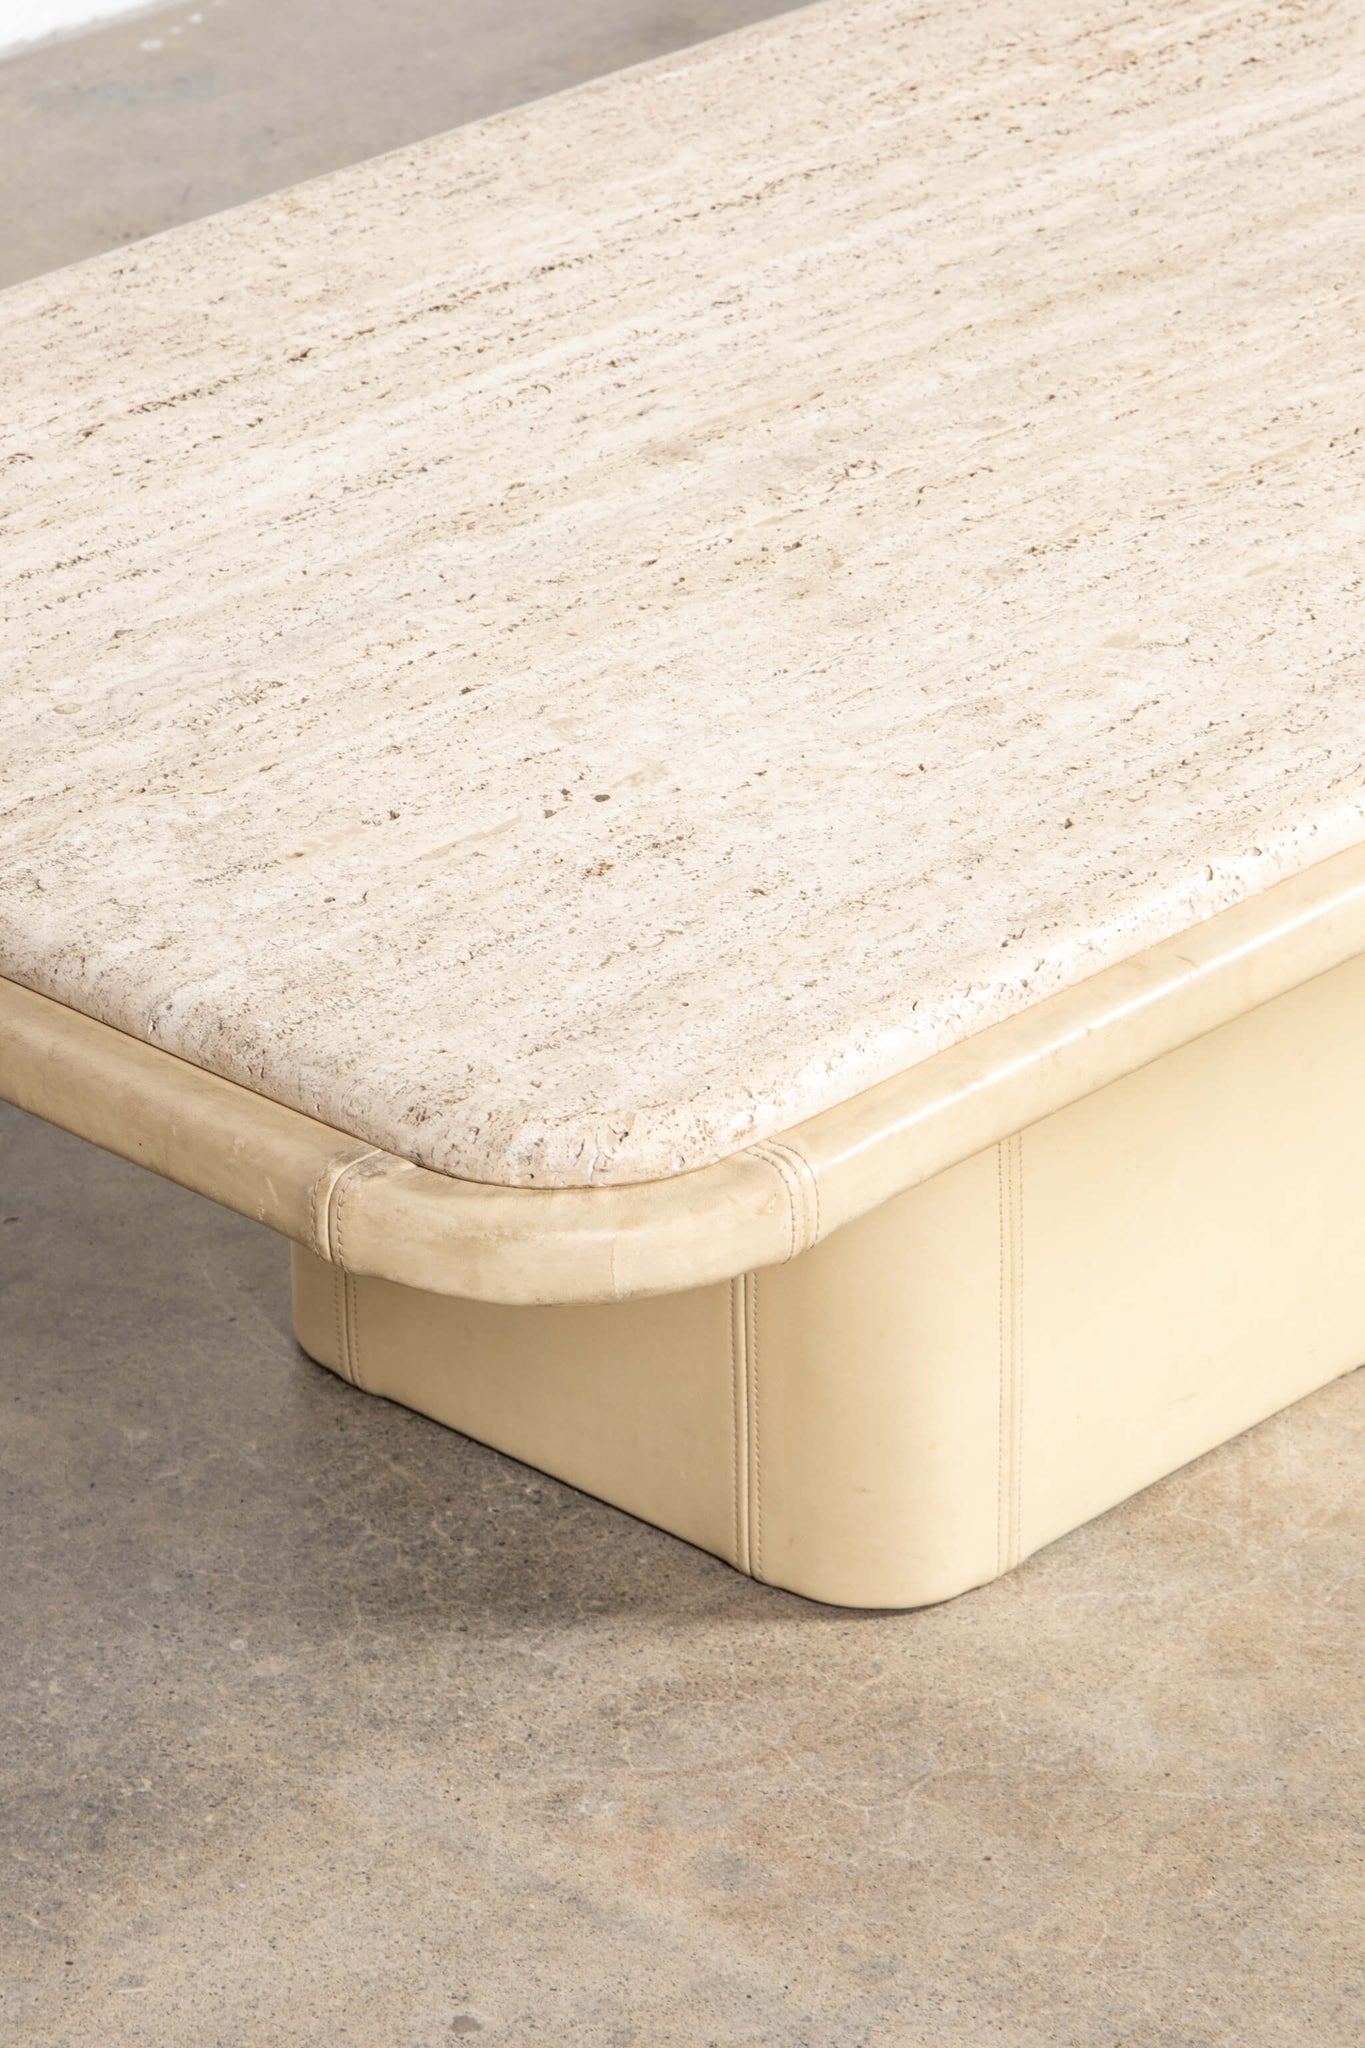 Vintage Cream Leather Wrapped Coffee Table with Travertine Top De Sede, corner detail